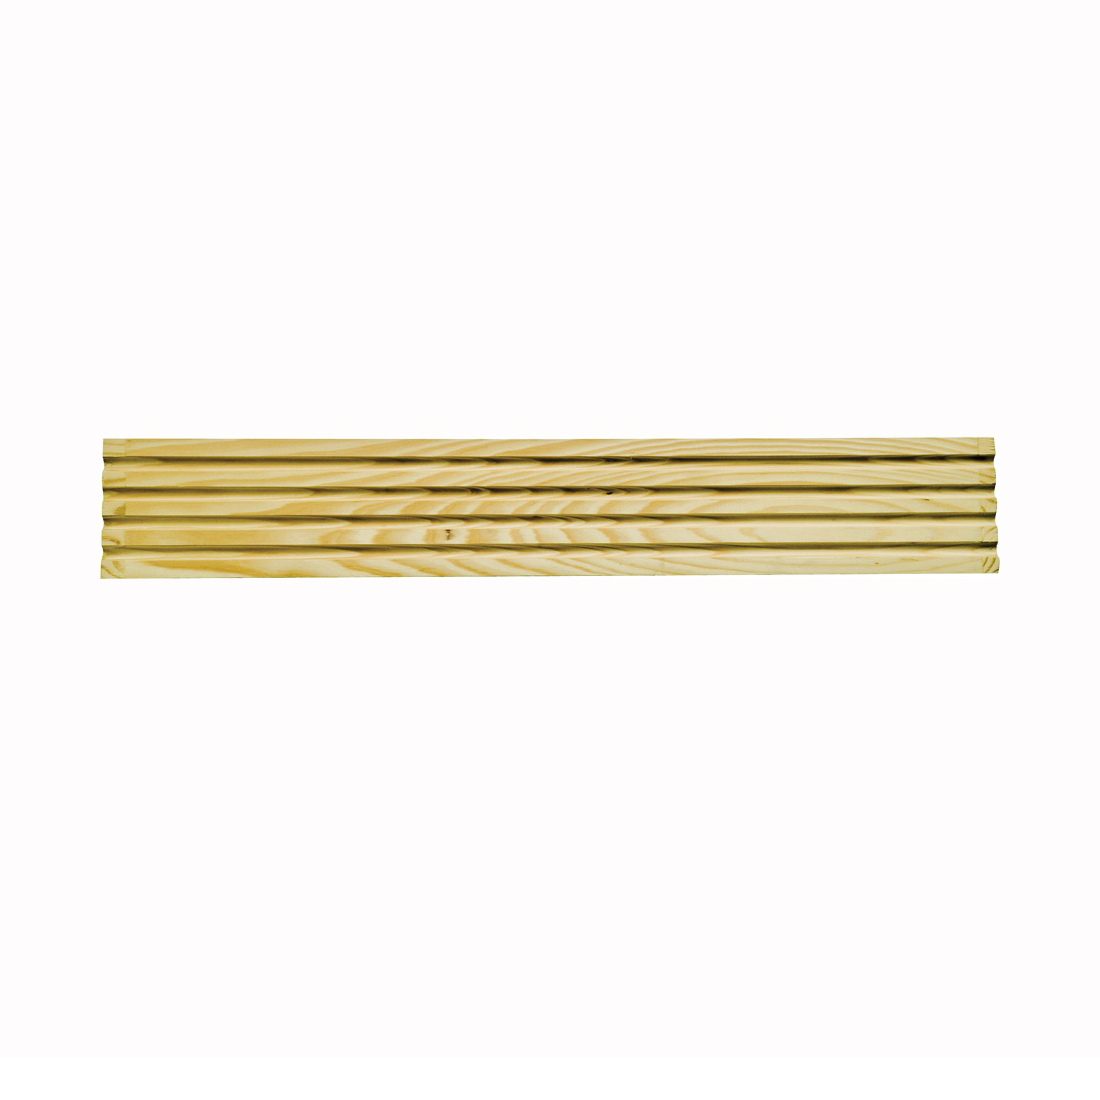 RFC27 Moulding, 2-1/4 in W, Casing, Fluted Profile, Pine